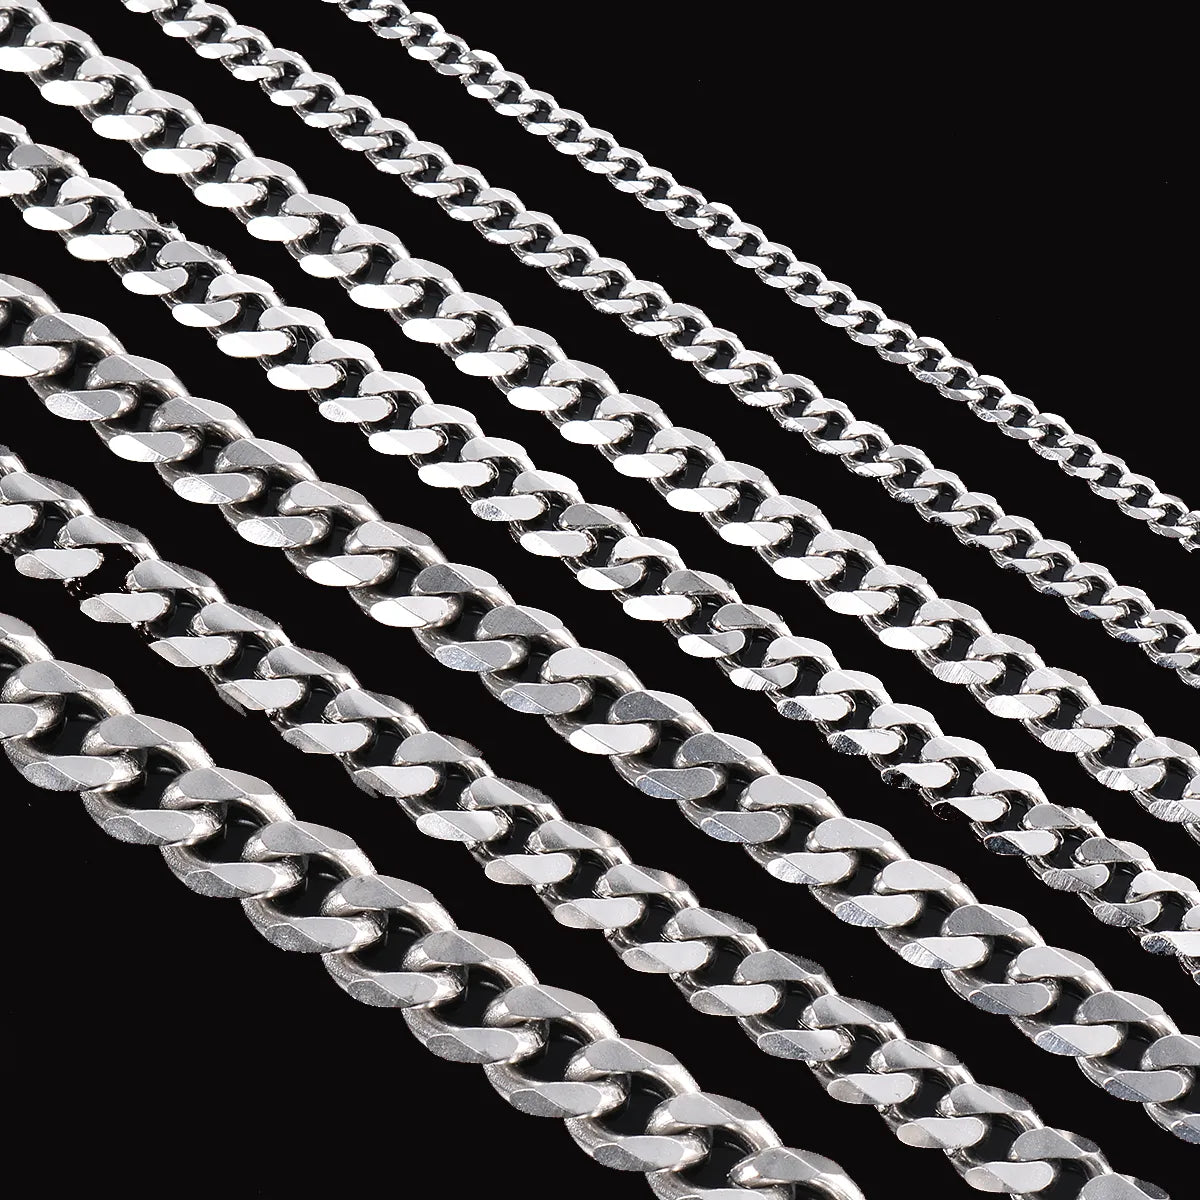 1 piece Size 3.6mm-9mm Men's Necklace: Stainless Steel Cuban Link Chain Bracelet Necklace, Steel Color Male Jewelry.